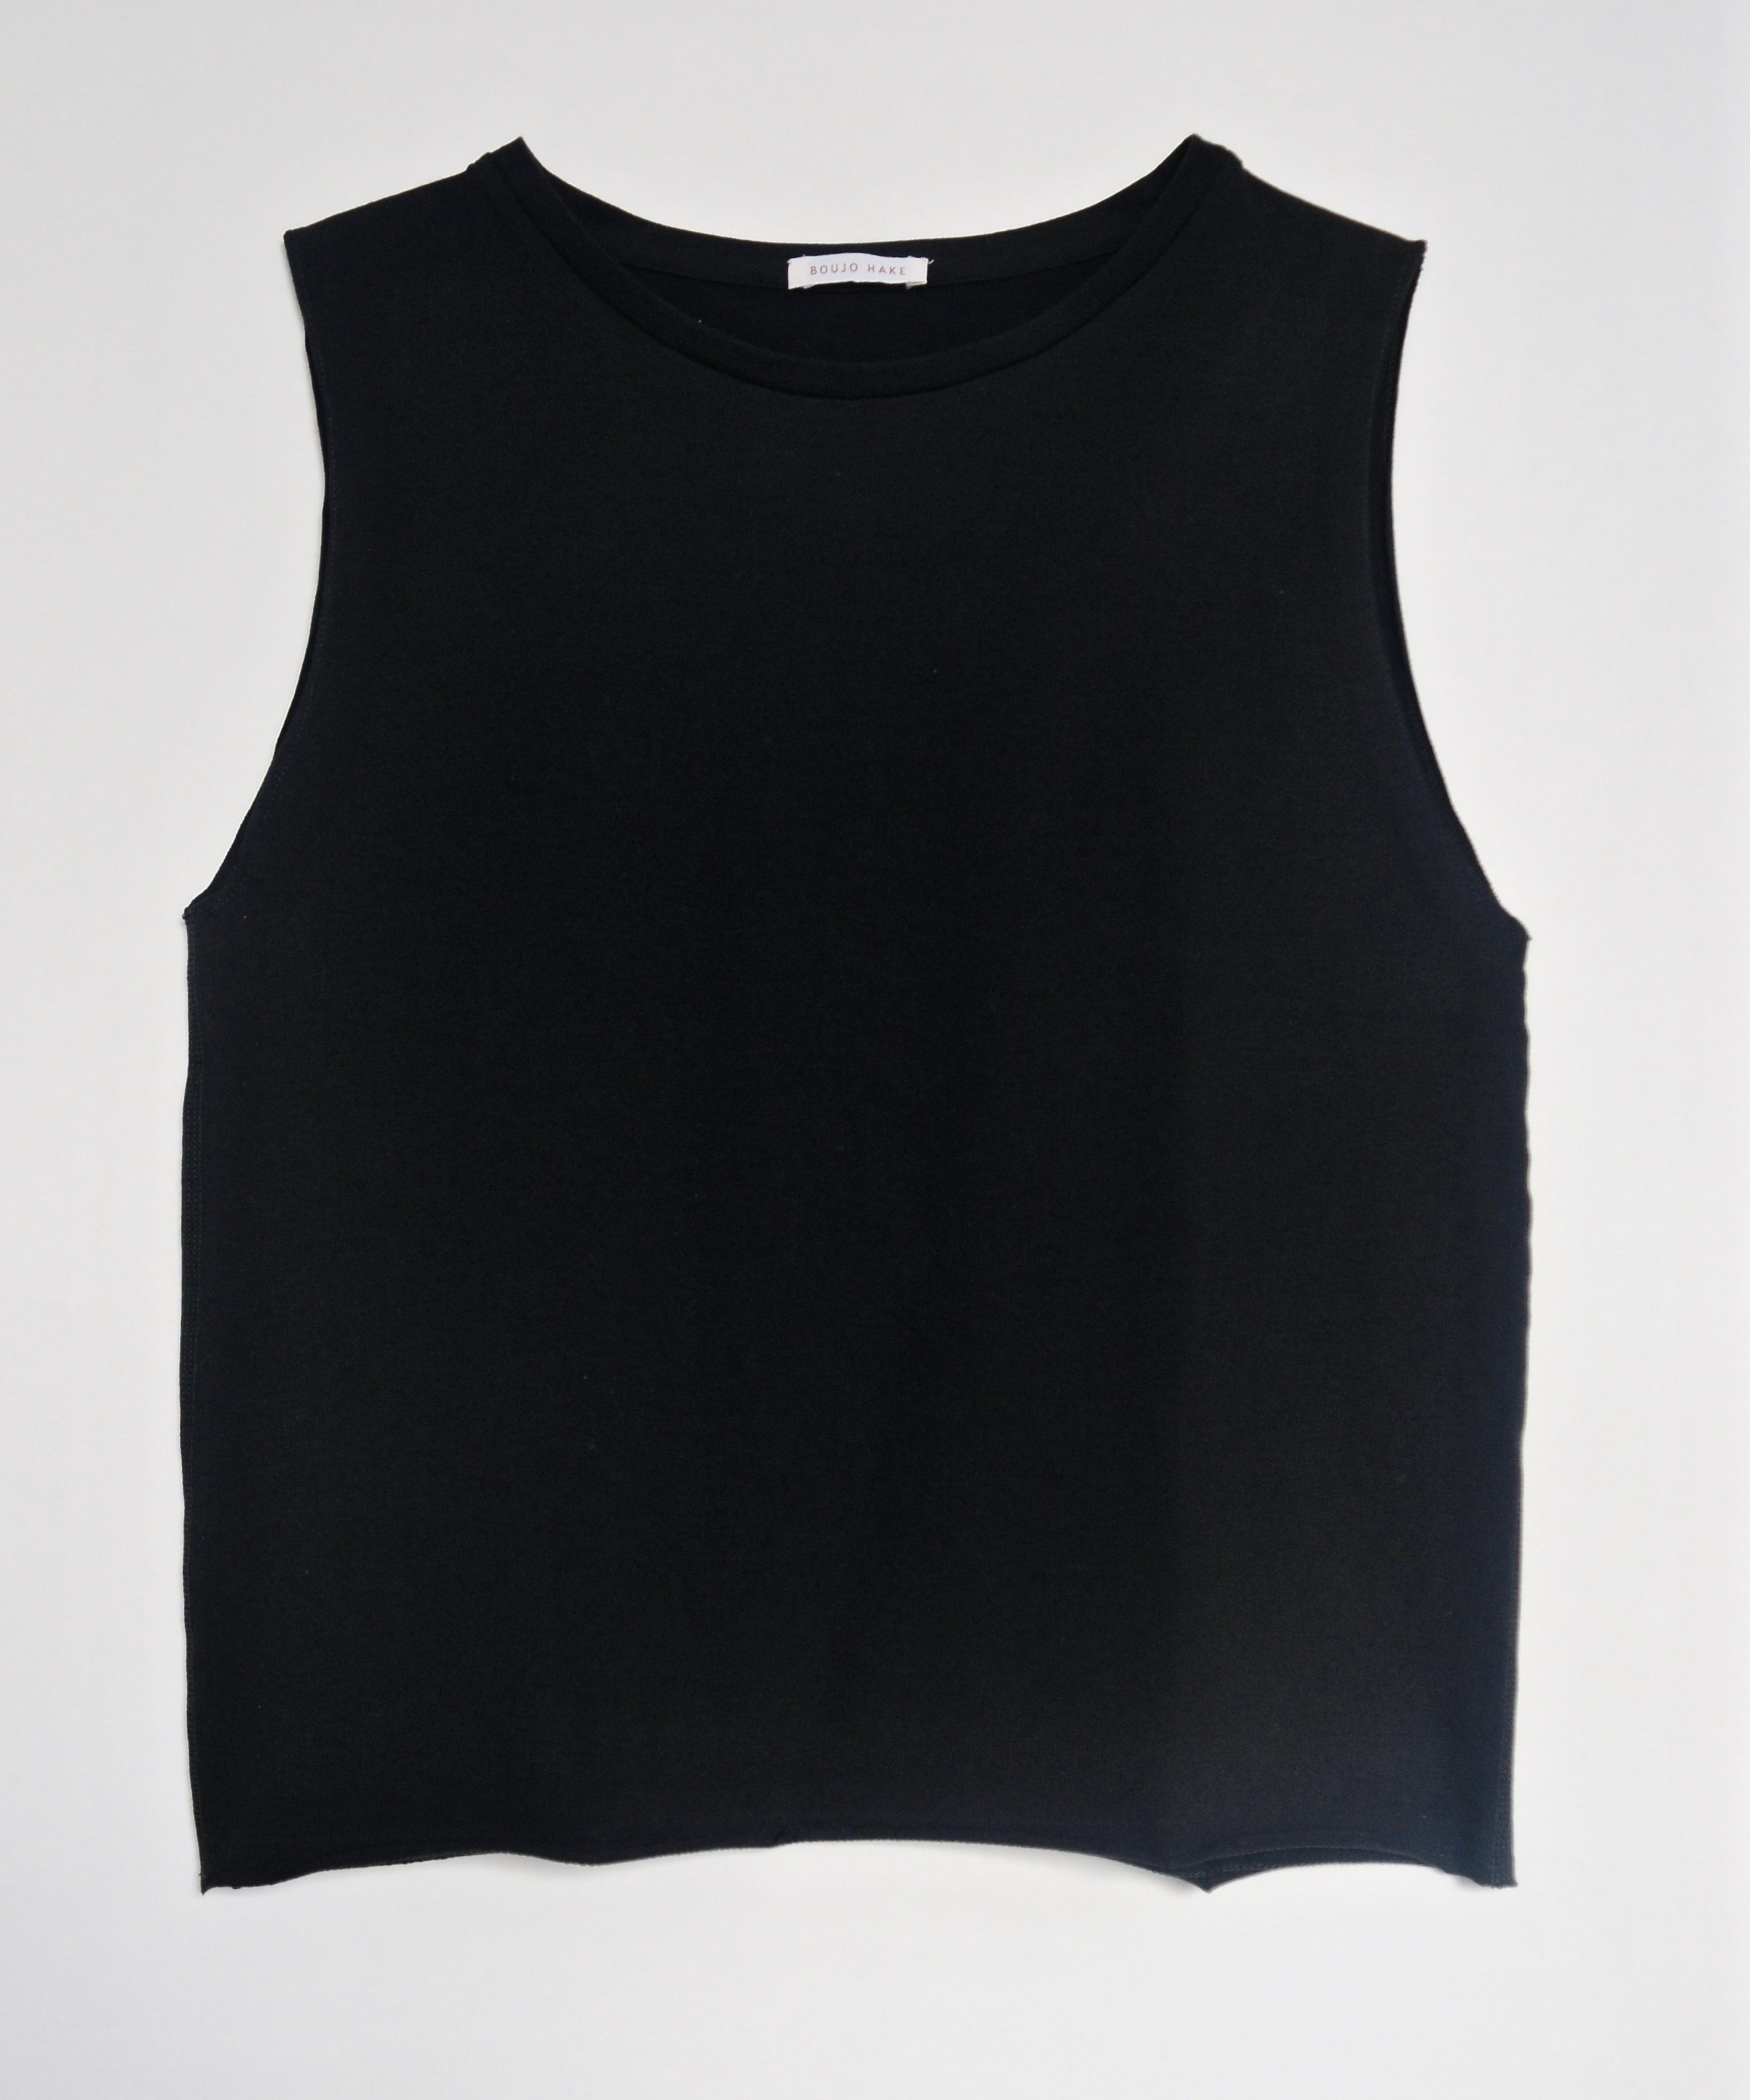 Boujo-hake-patty-vest-muscle-tank-organic-cotton-GOTS-certified-made-in-the-uk-sustainable